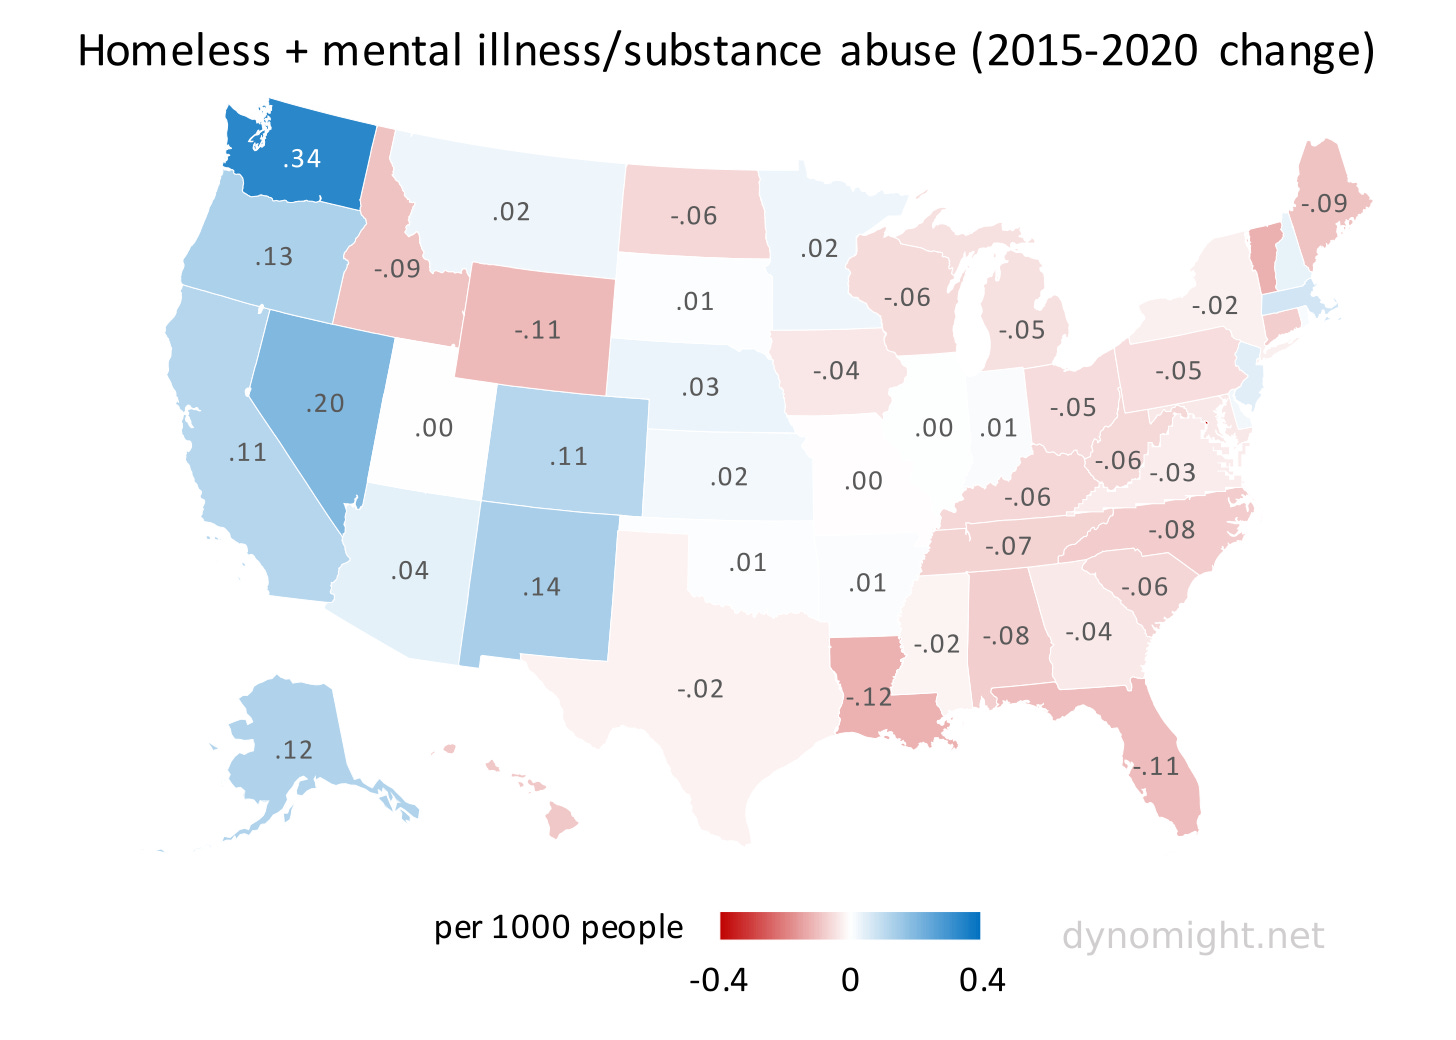 Mental health and substance abuse changes